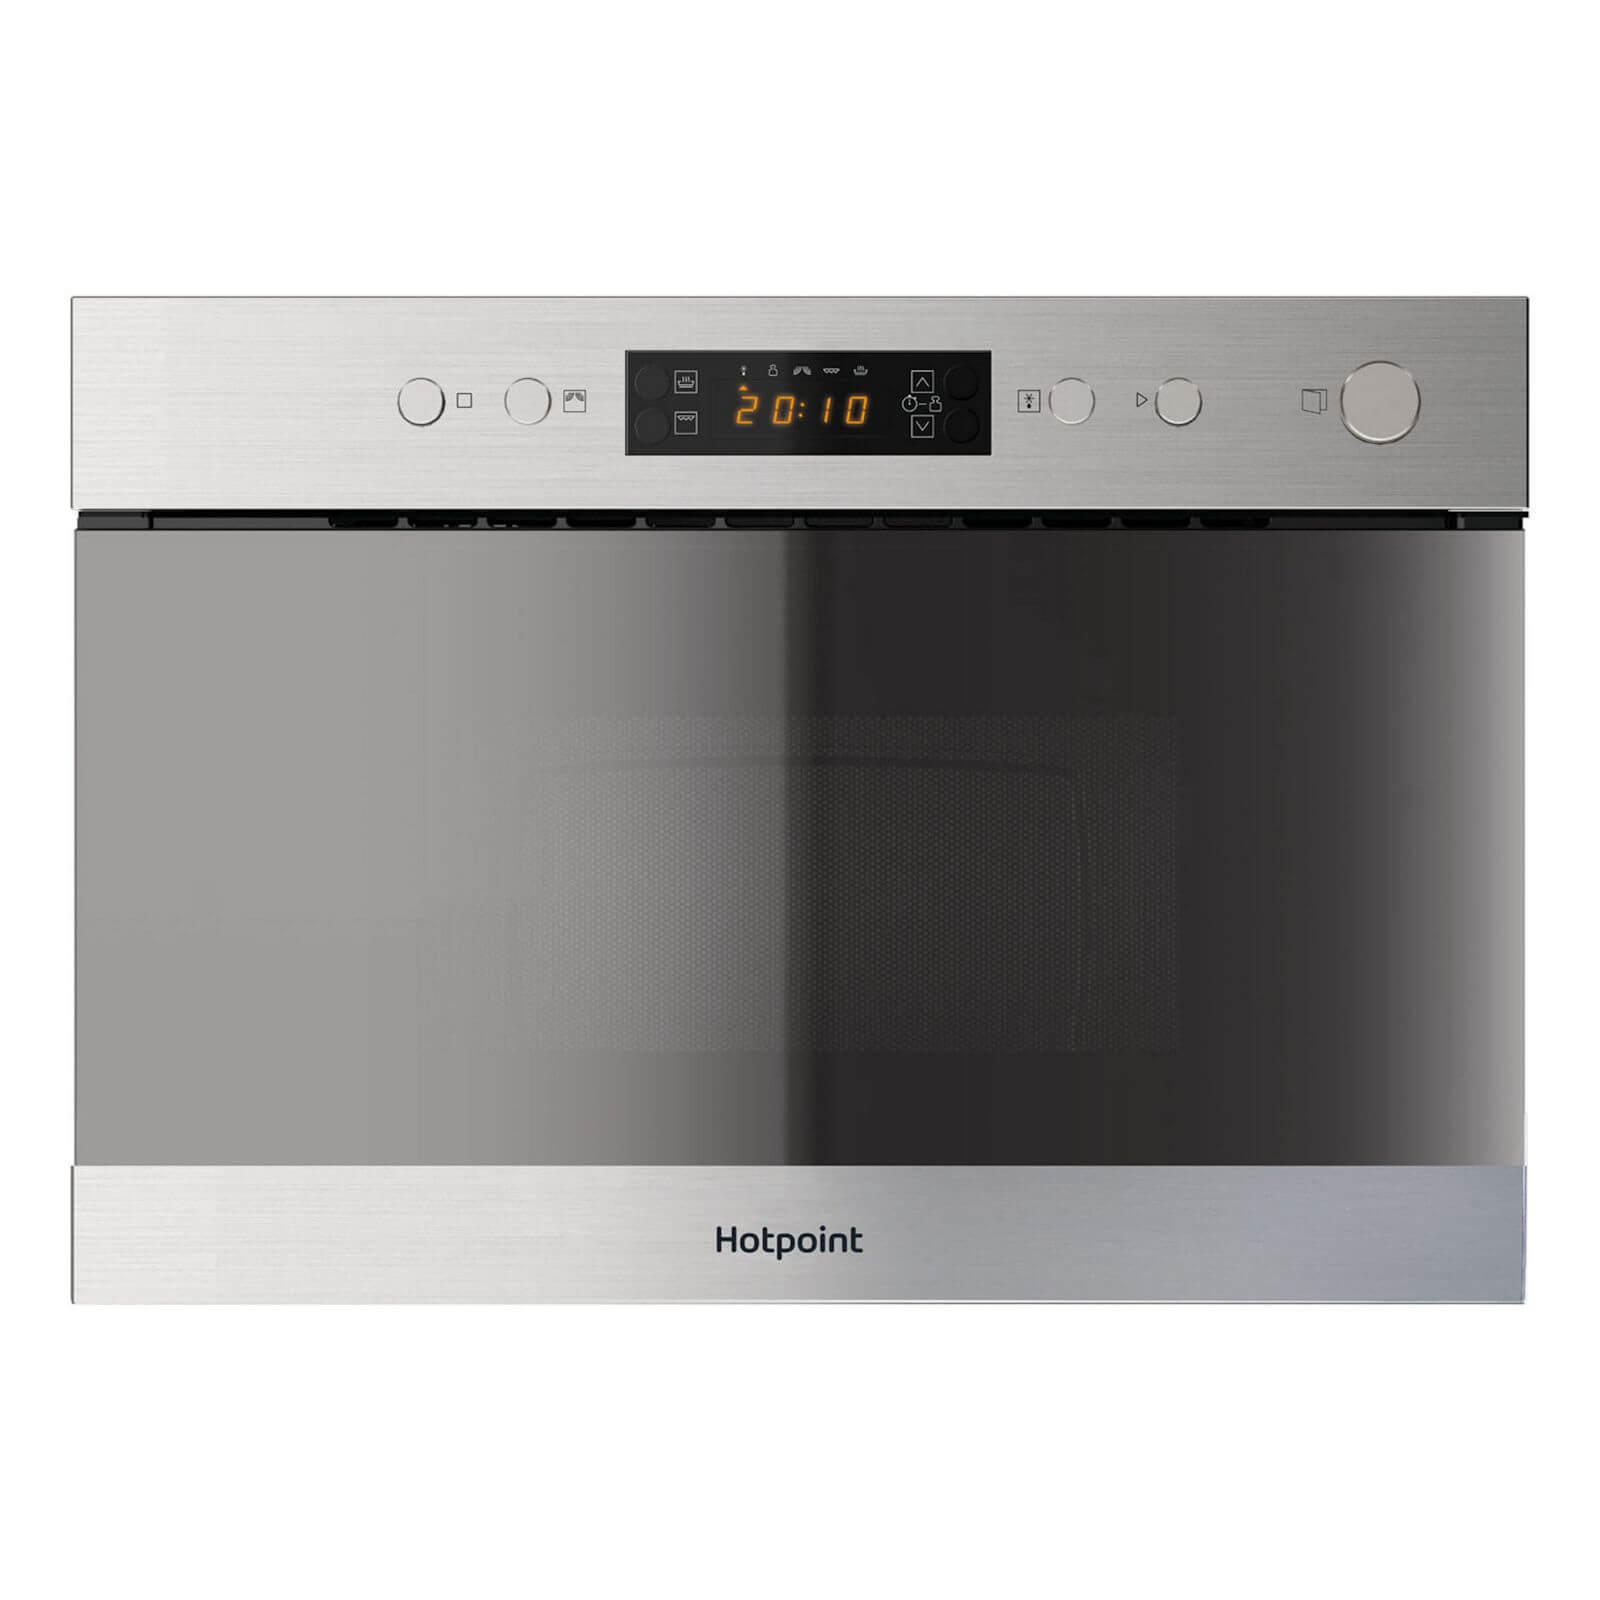 Hotpoint MN314 IX H Built-in Microwave Grill - Stainless Steel